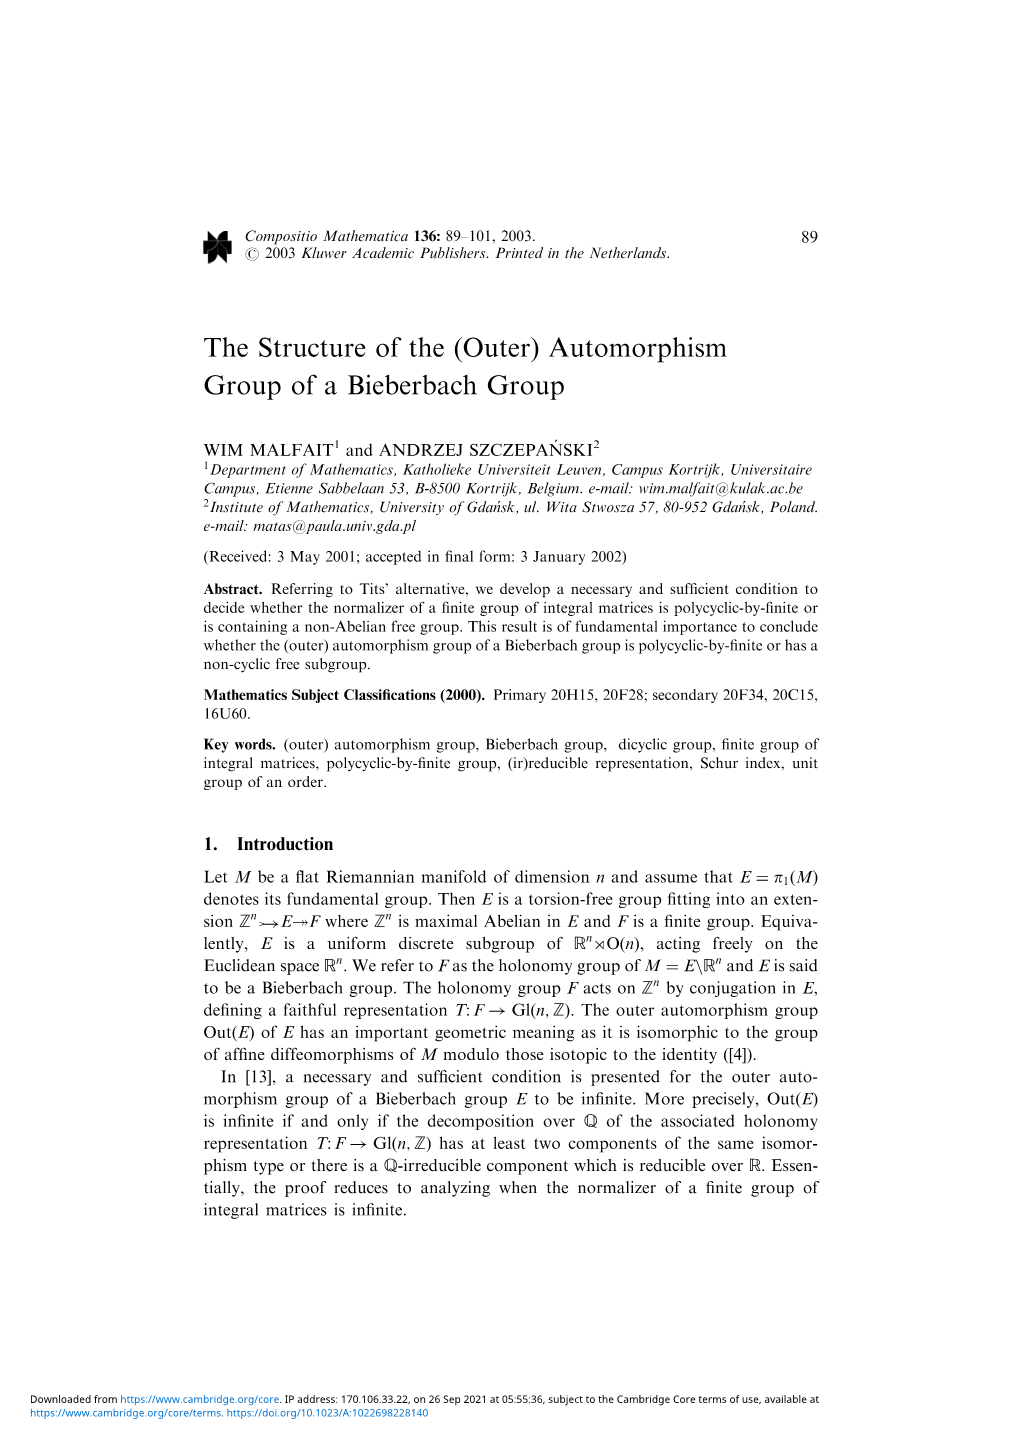 (Outer) Automorphism Group of a Bieberbach Group